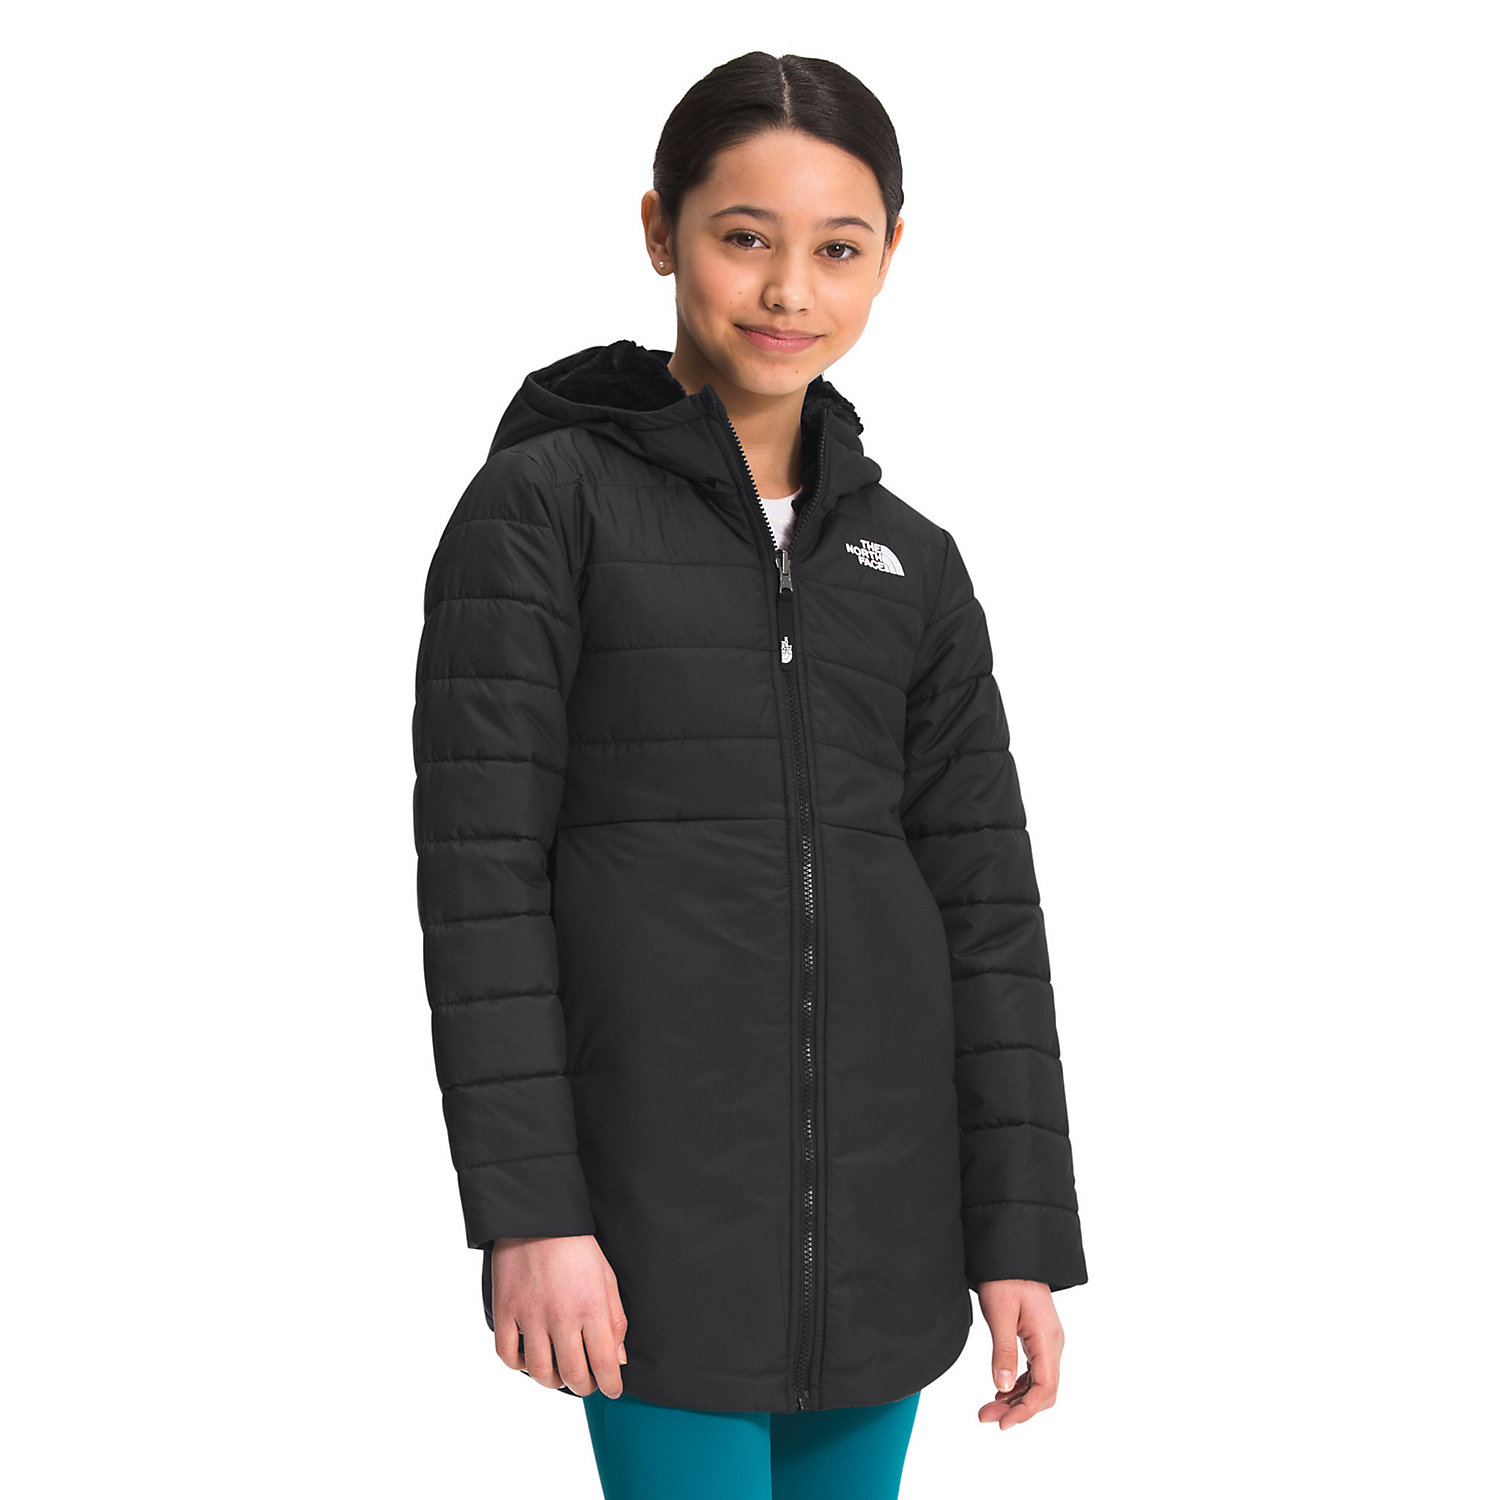 The North Face Girls Reversible Mossbud Swirl Parka